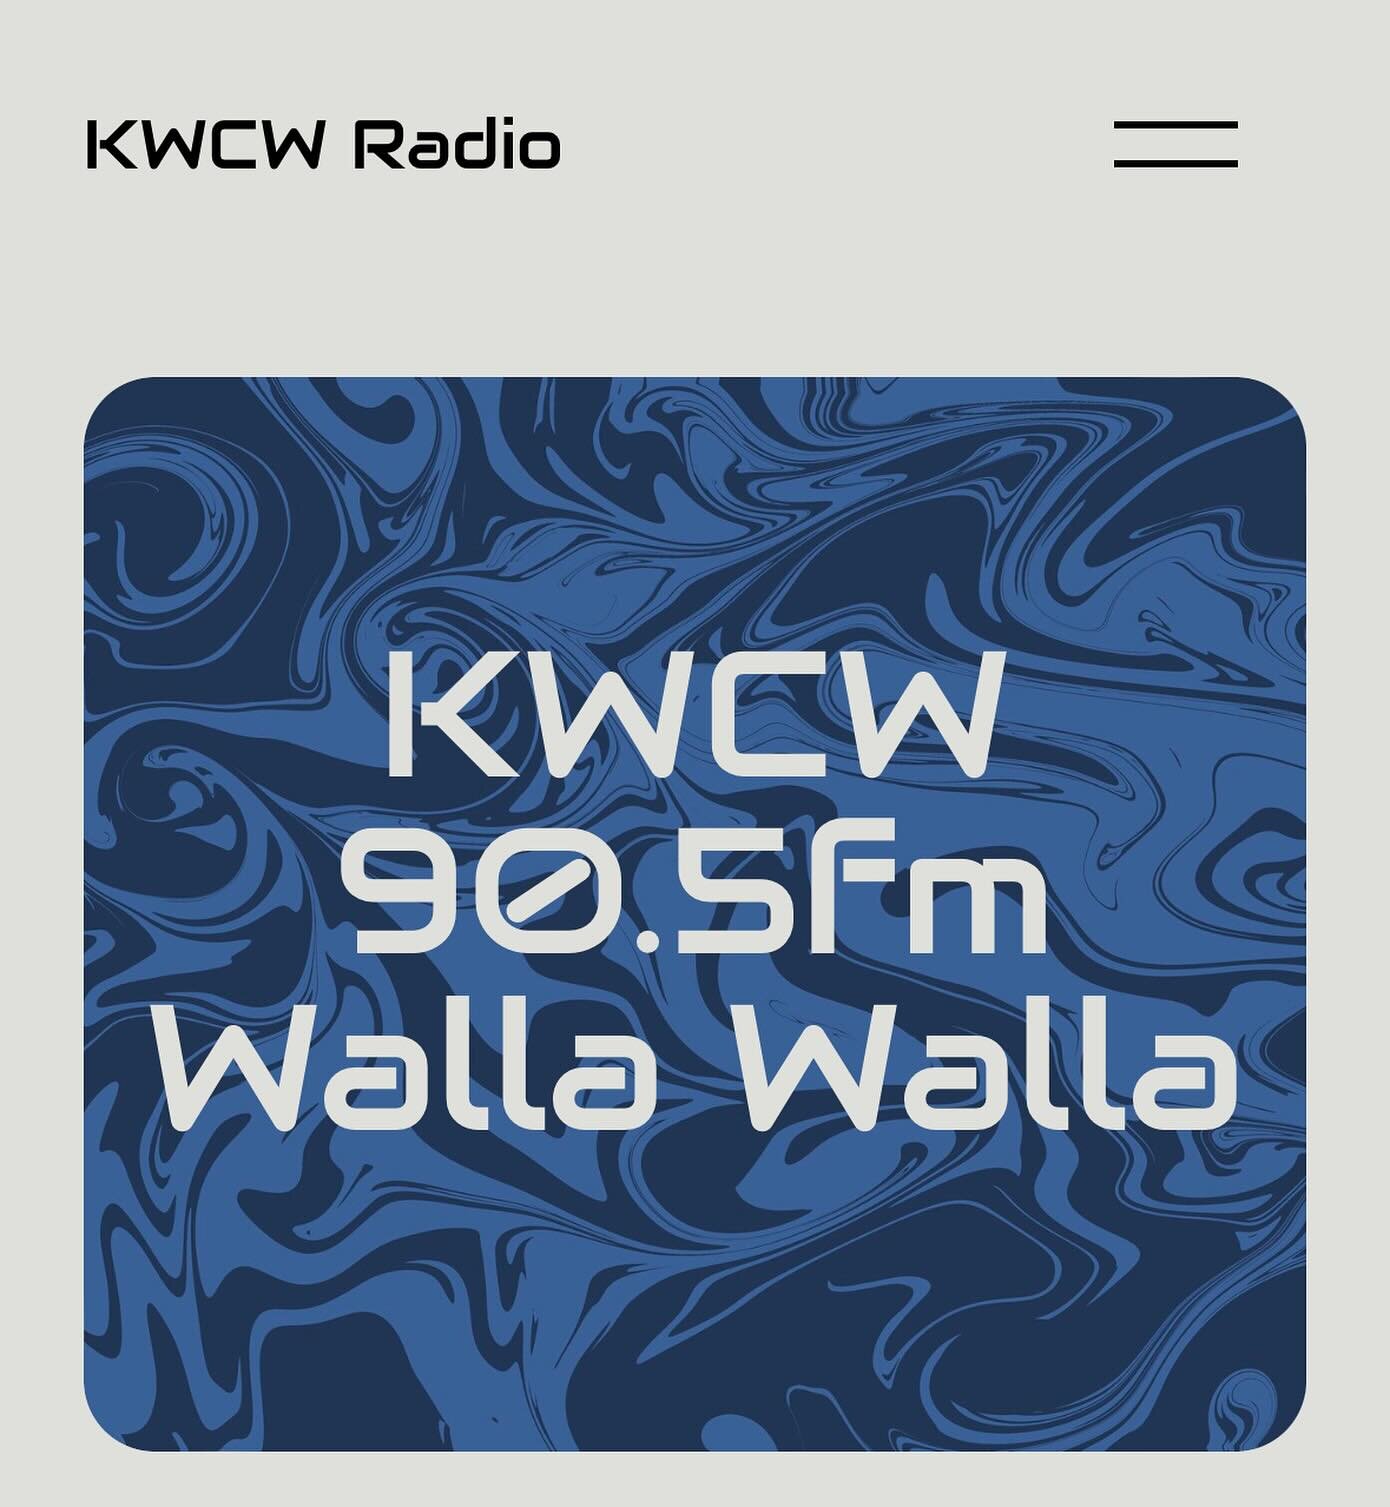 finally leaving 2015 (tumblr) &hellip; now we have a (working) website! go to http://kwcwradio.com/ and check it out 🌀🥣🦕🥏